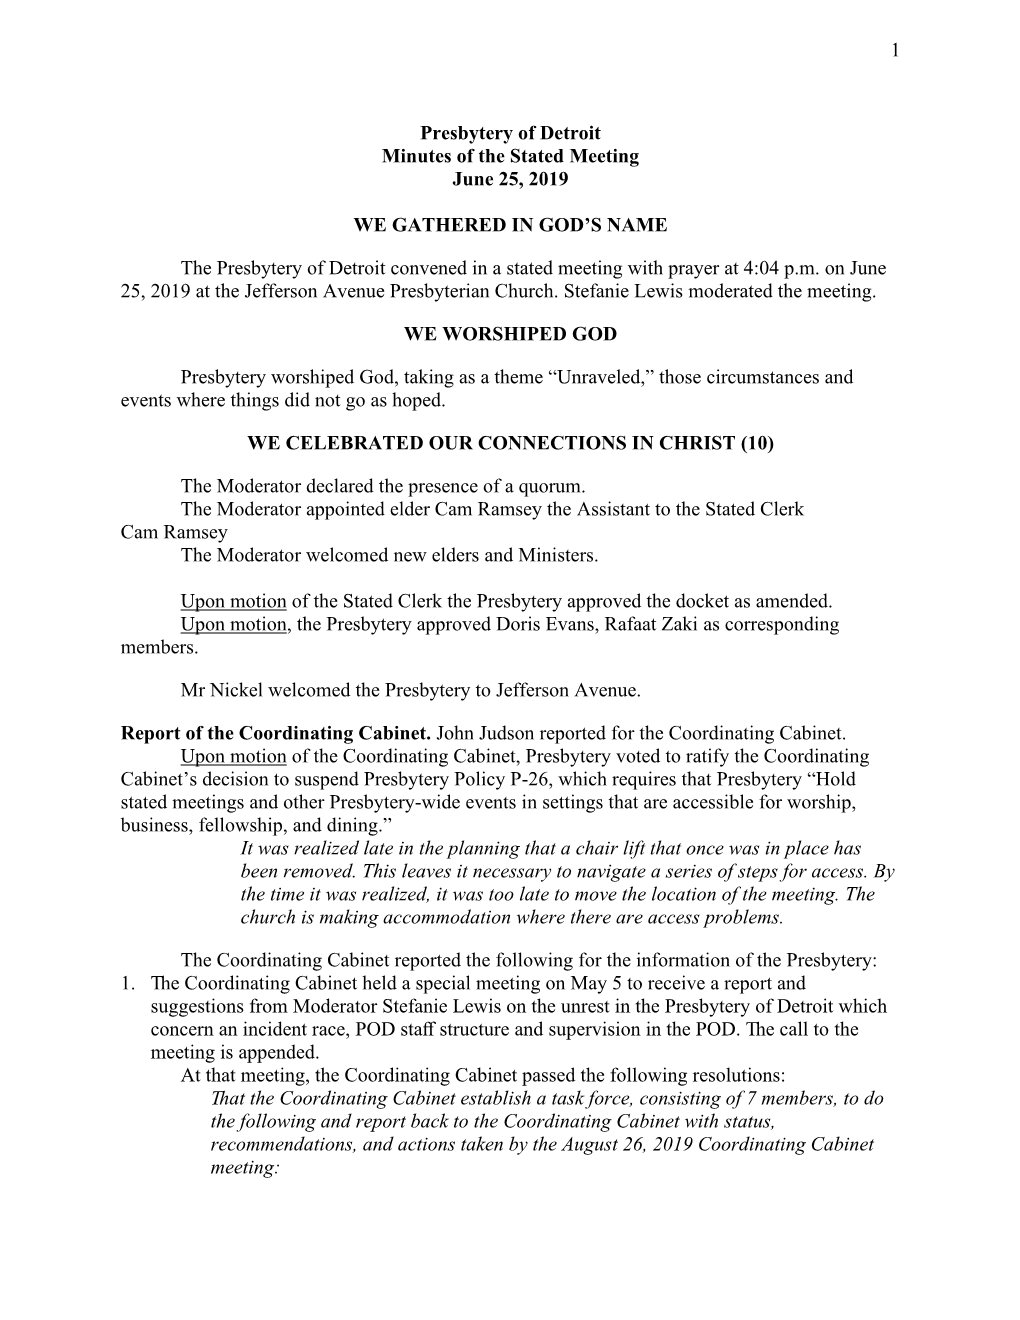 Presbytery of Detroit Minutes of the Stated Meeting June 25, 2019 WE GATHERED in GOD's NAME the Presbytery of Detroit Convened